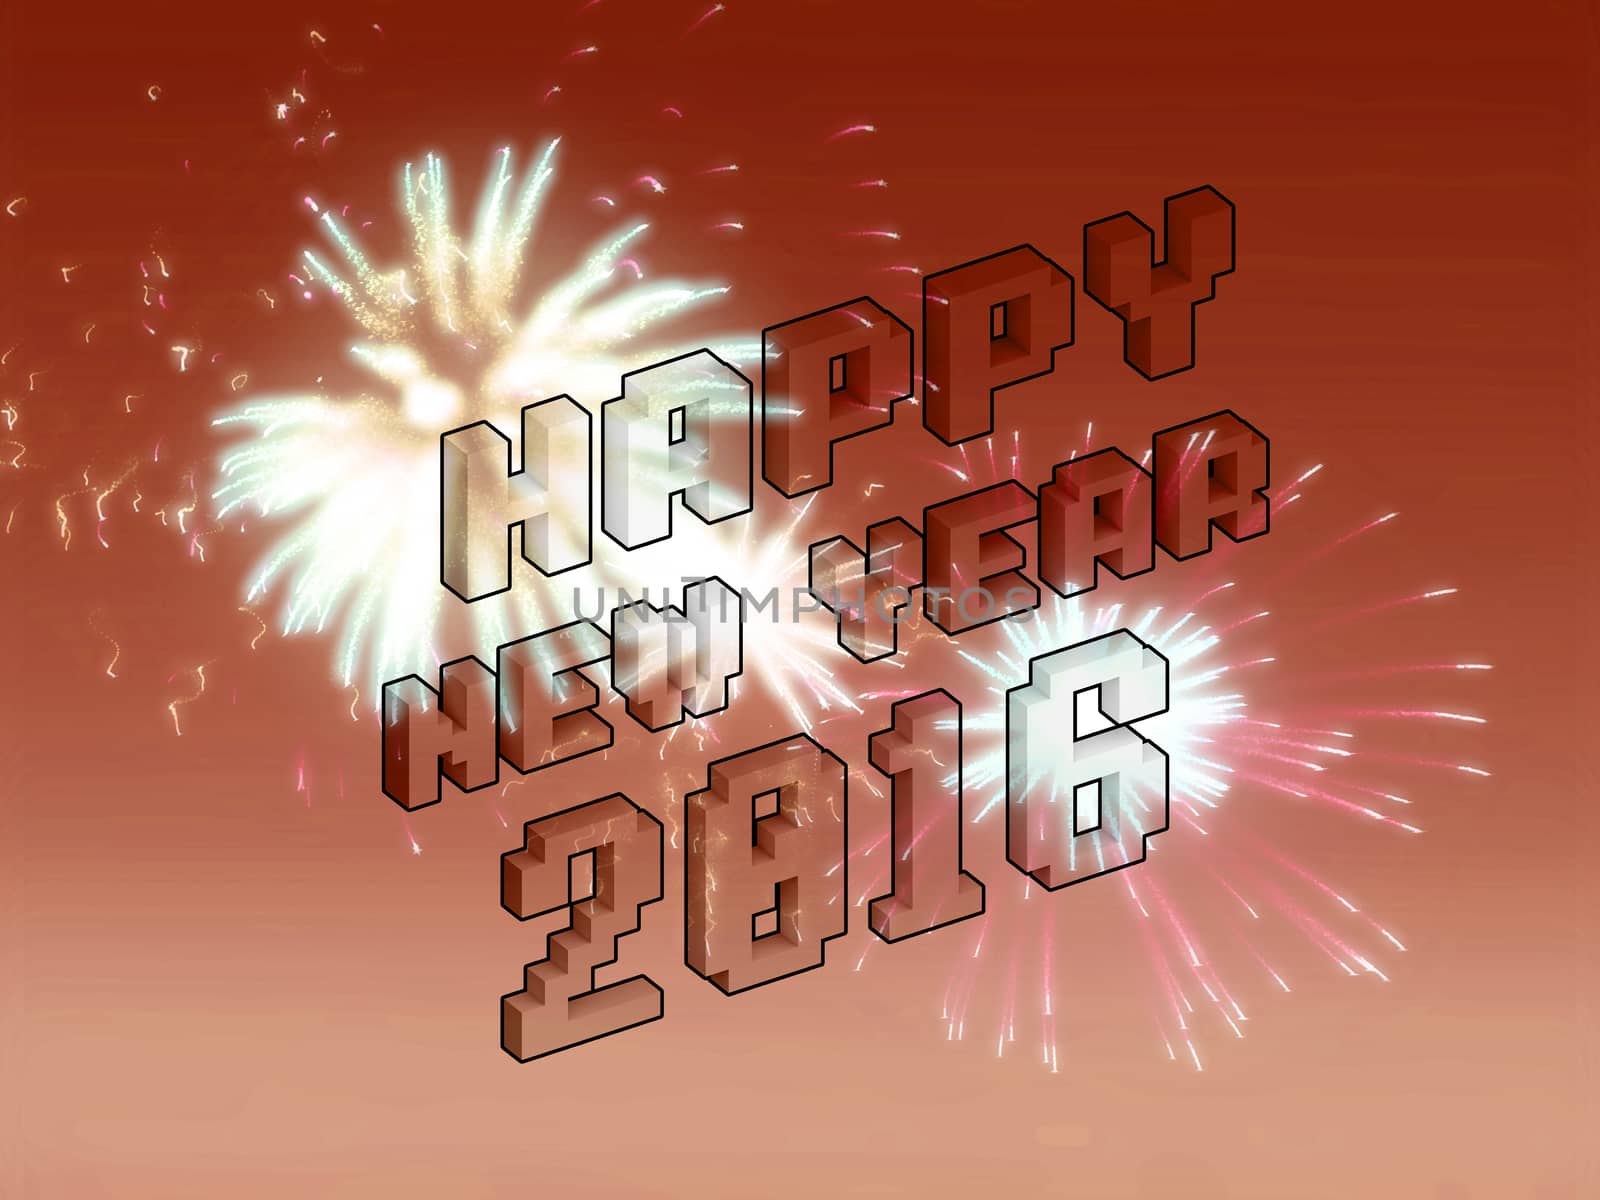 Happy new year fireworks 2016 holiday background design, abstract background